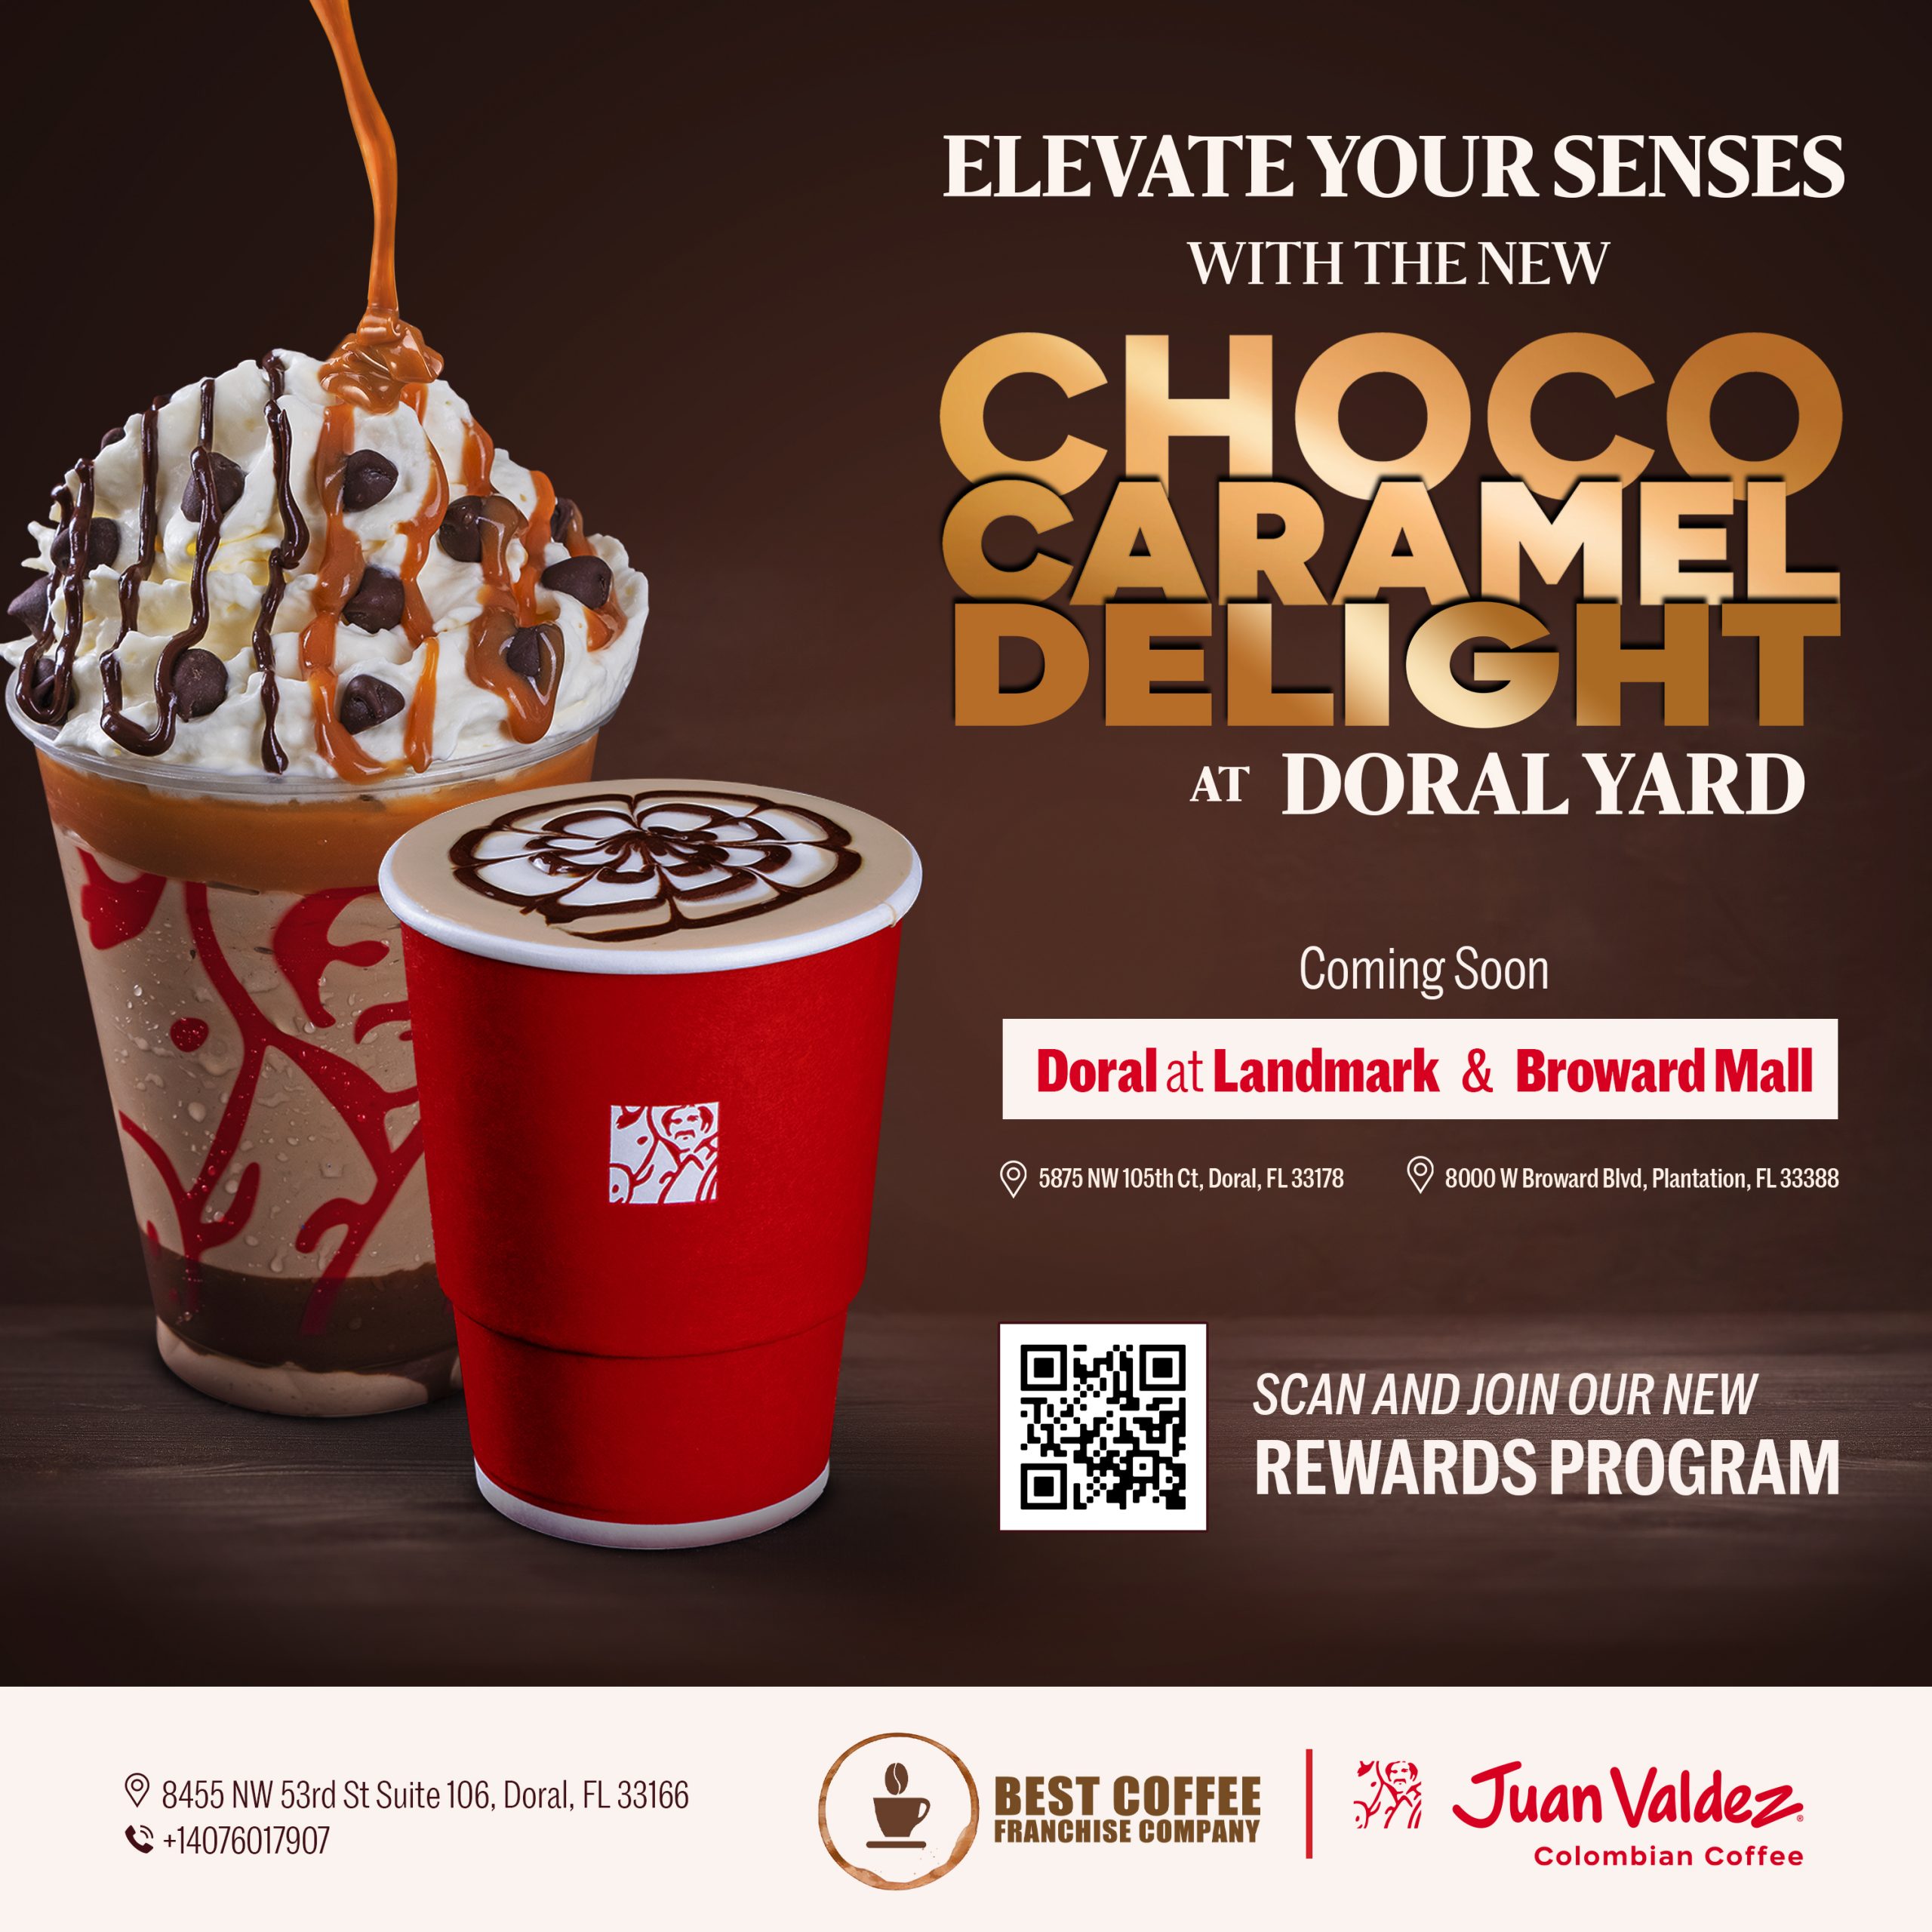 Juan Valdez Colombian Coffee Indulge in the rich flavor of our New Choco Caramel Delight. Satisfy your sweet tooth with every sip of our perfectly crafted blend of chocolate and caramel. Come try it today and treat yourself to a moment of pure delight.